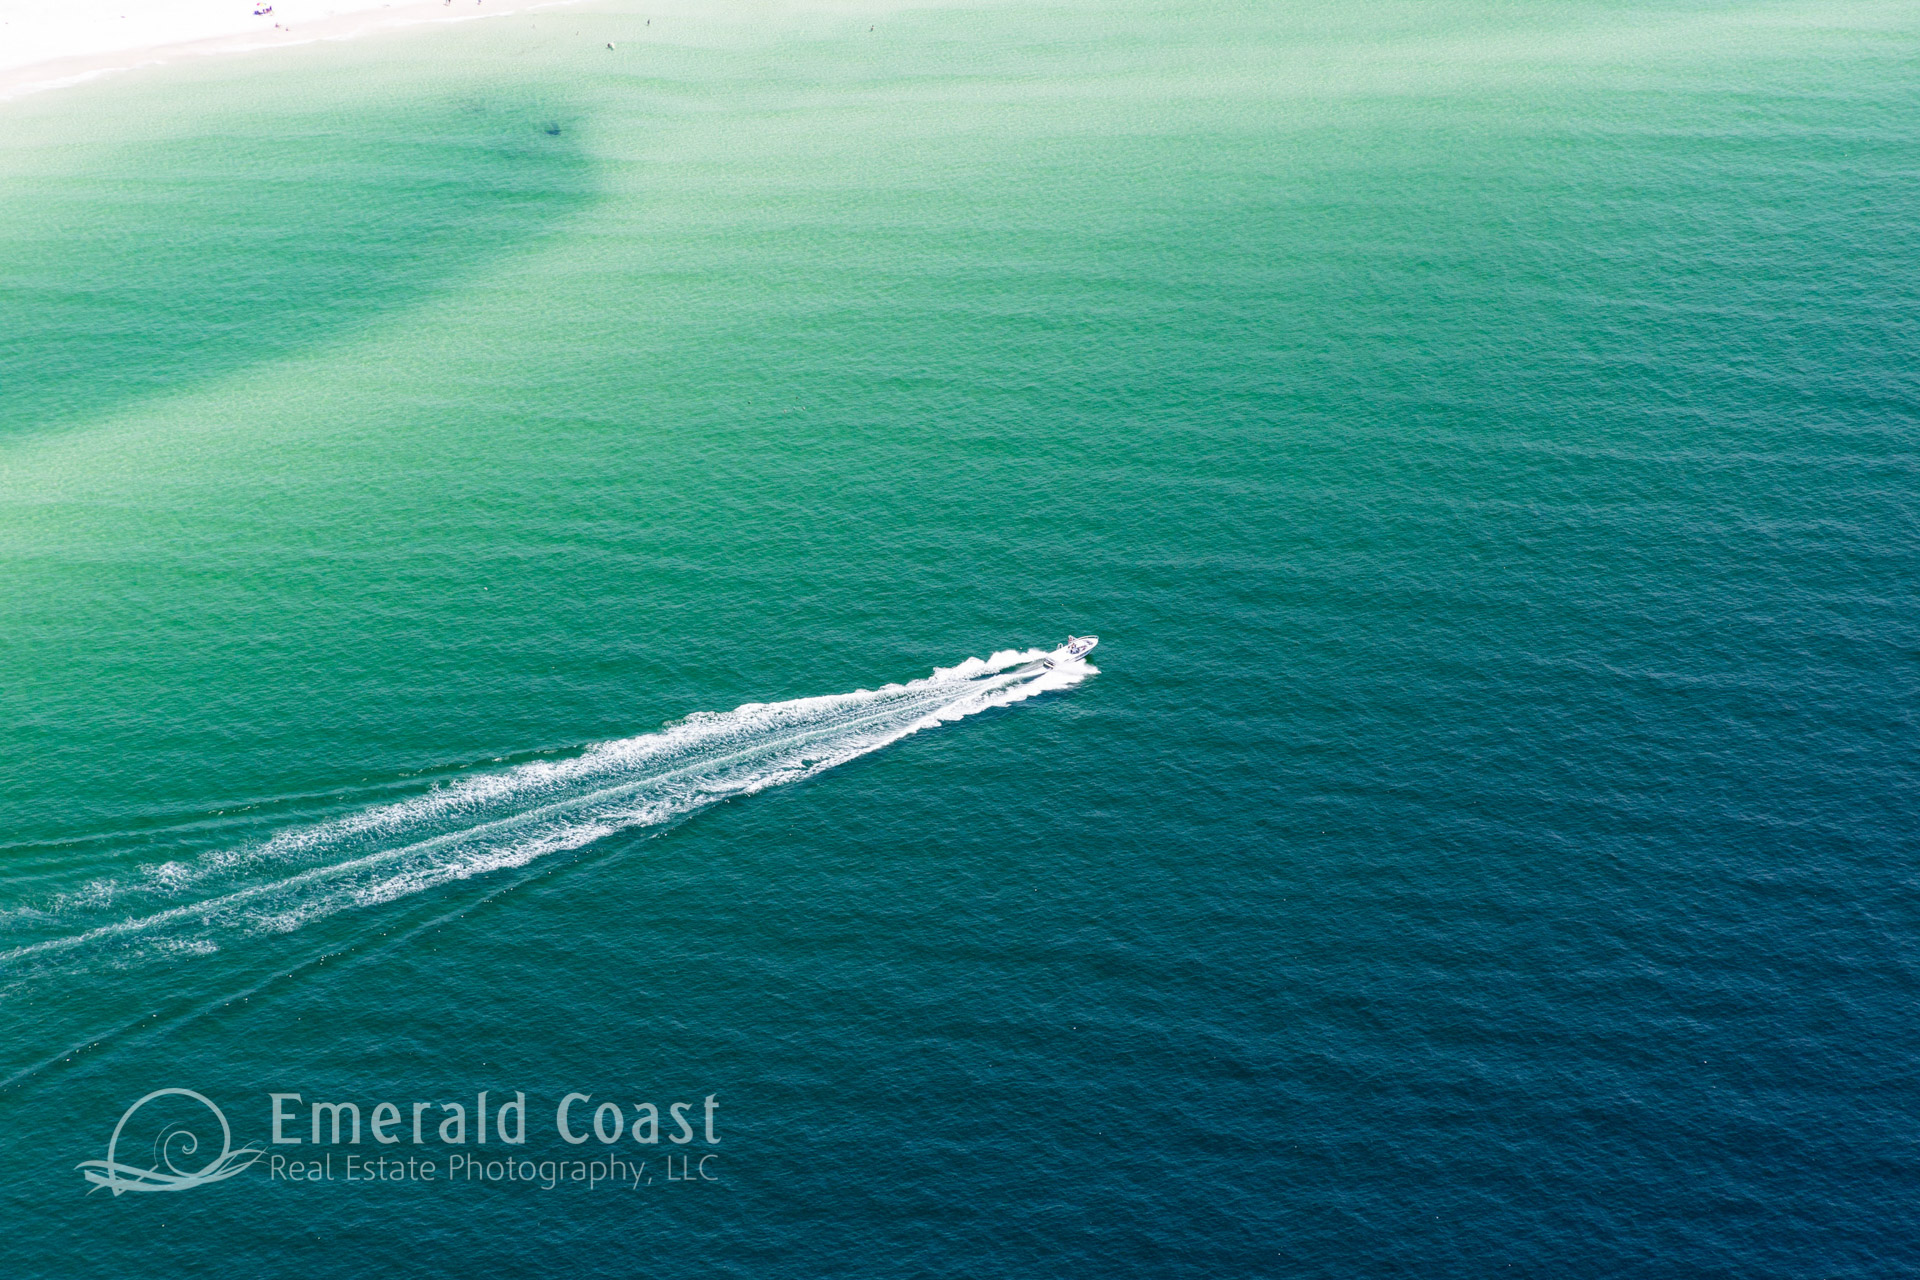 Blue Green Water, Gulf of Mexico, Boat, Aerial Photograph